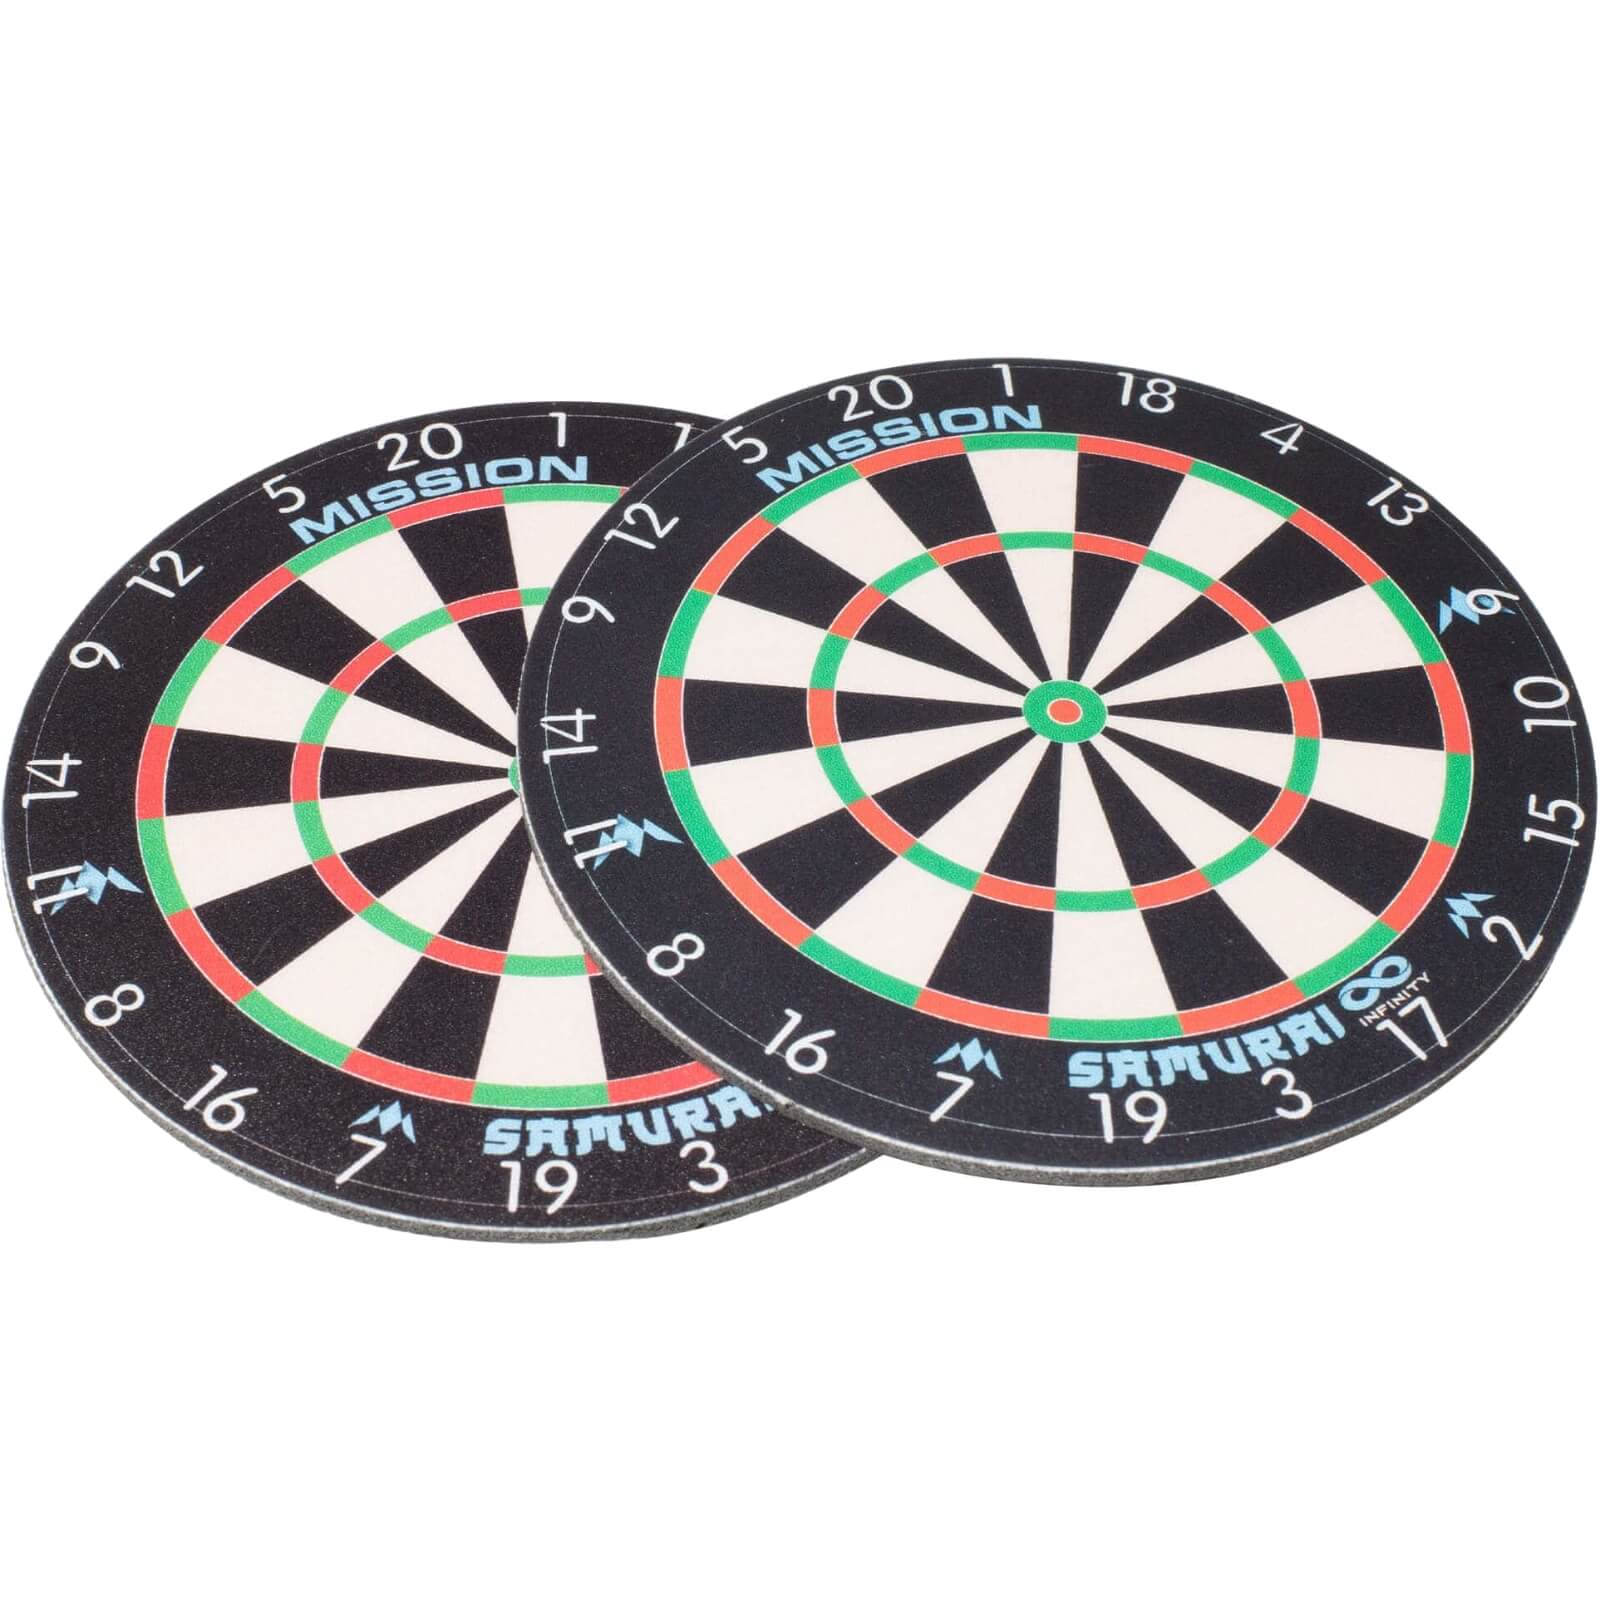 Other Accessories - Mission - Infinity Dartboard Coasters - 9.5cm - 2 Pack 